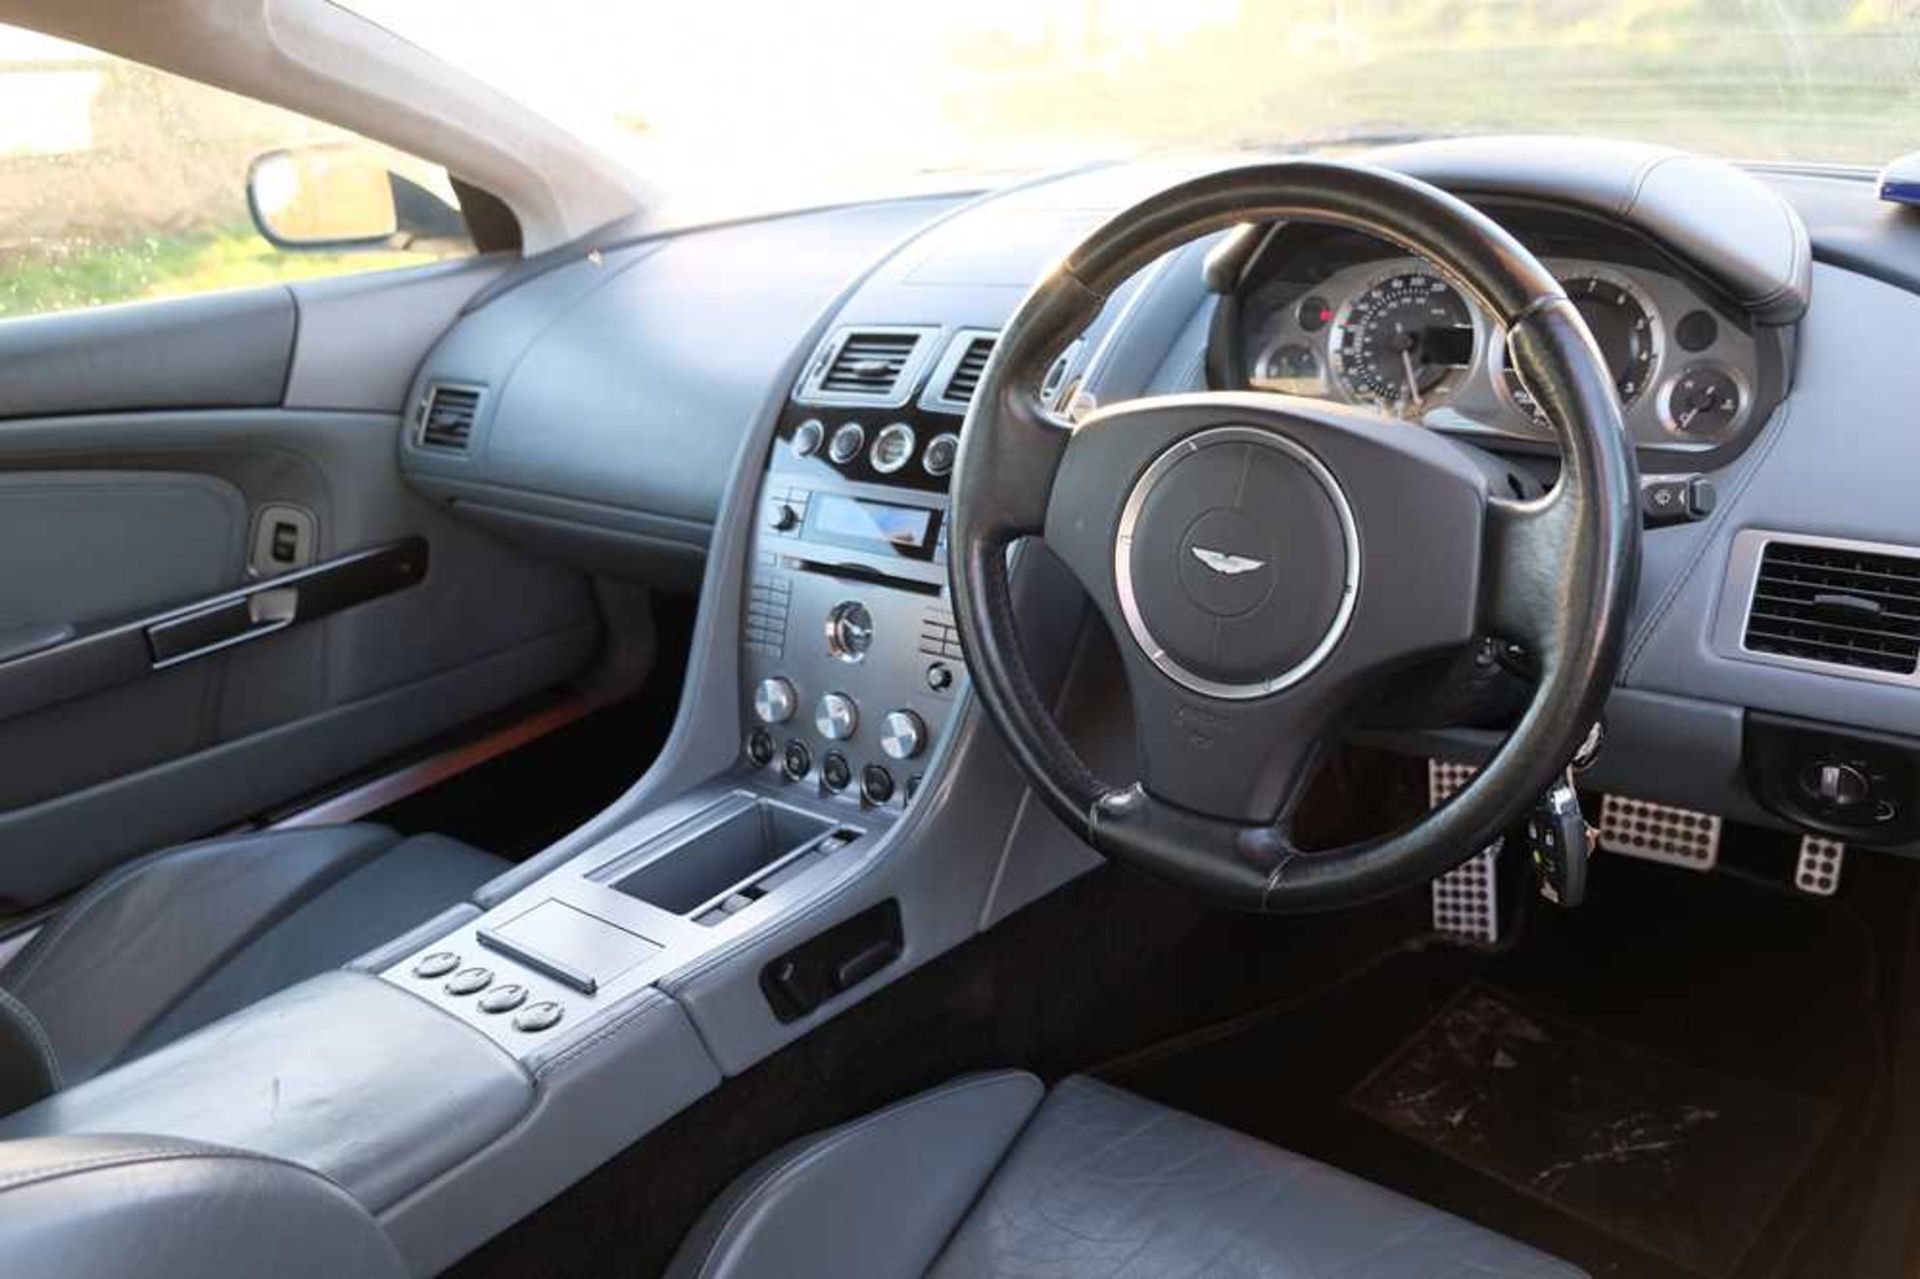 2005 Aston Martin DB9 c.25,000 from new and 4 former keepers - Image 29 of 59